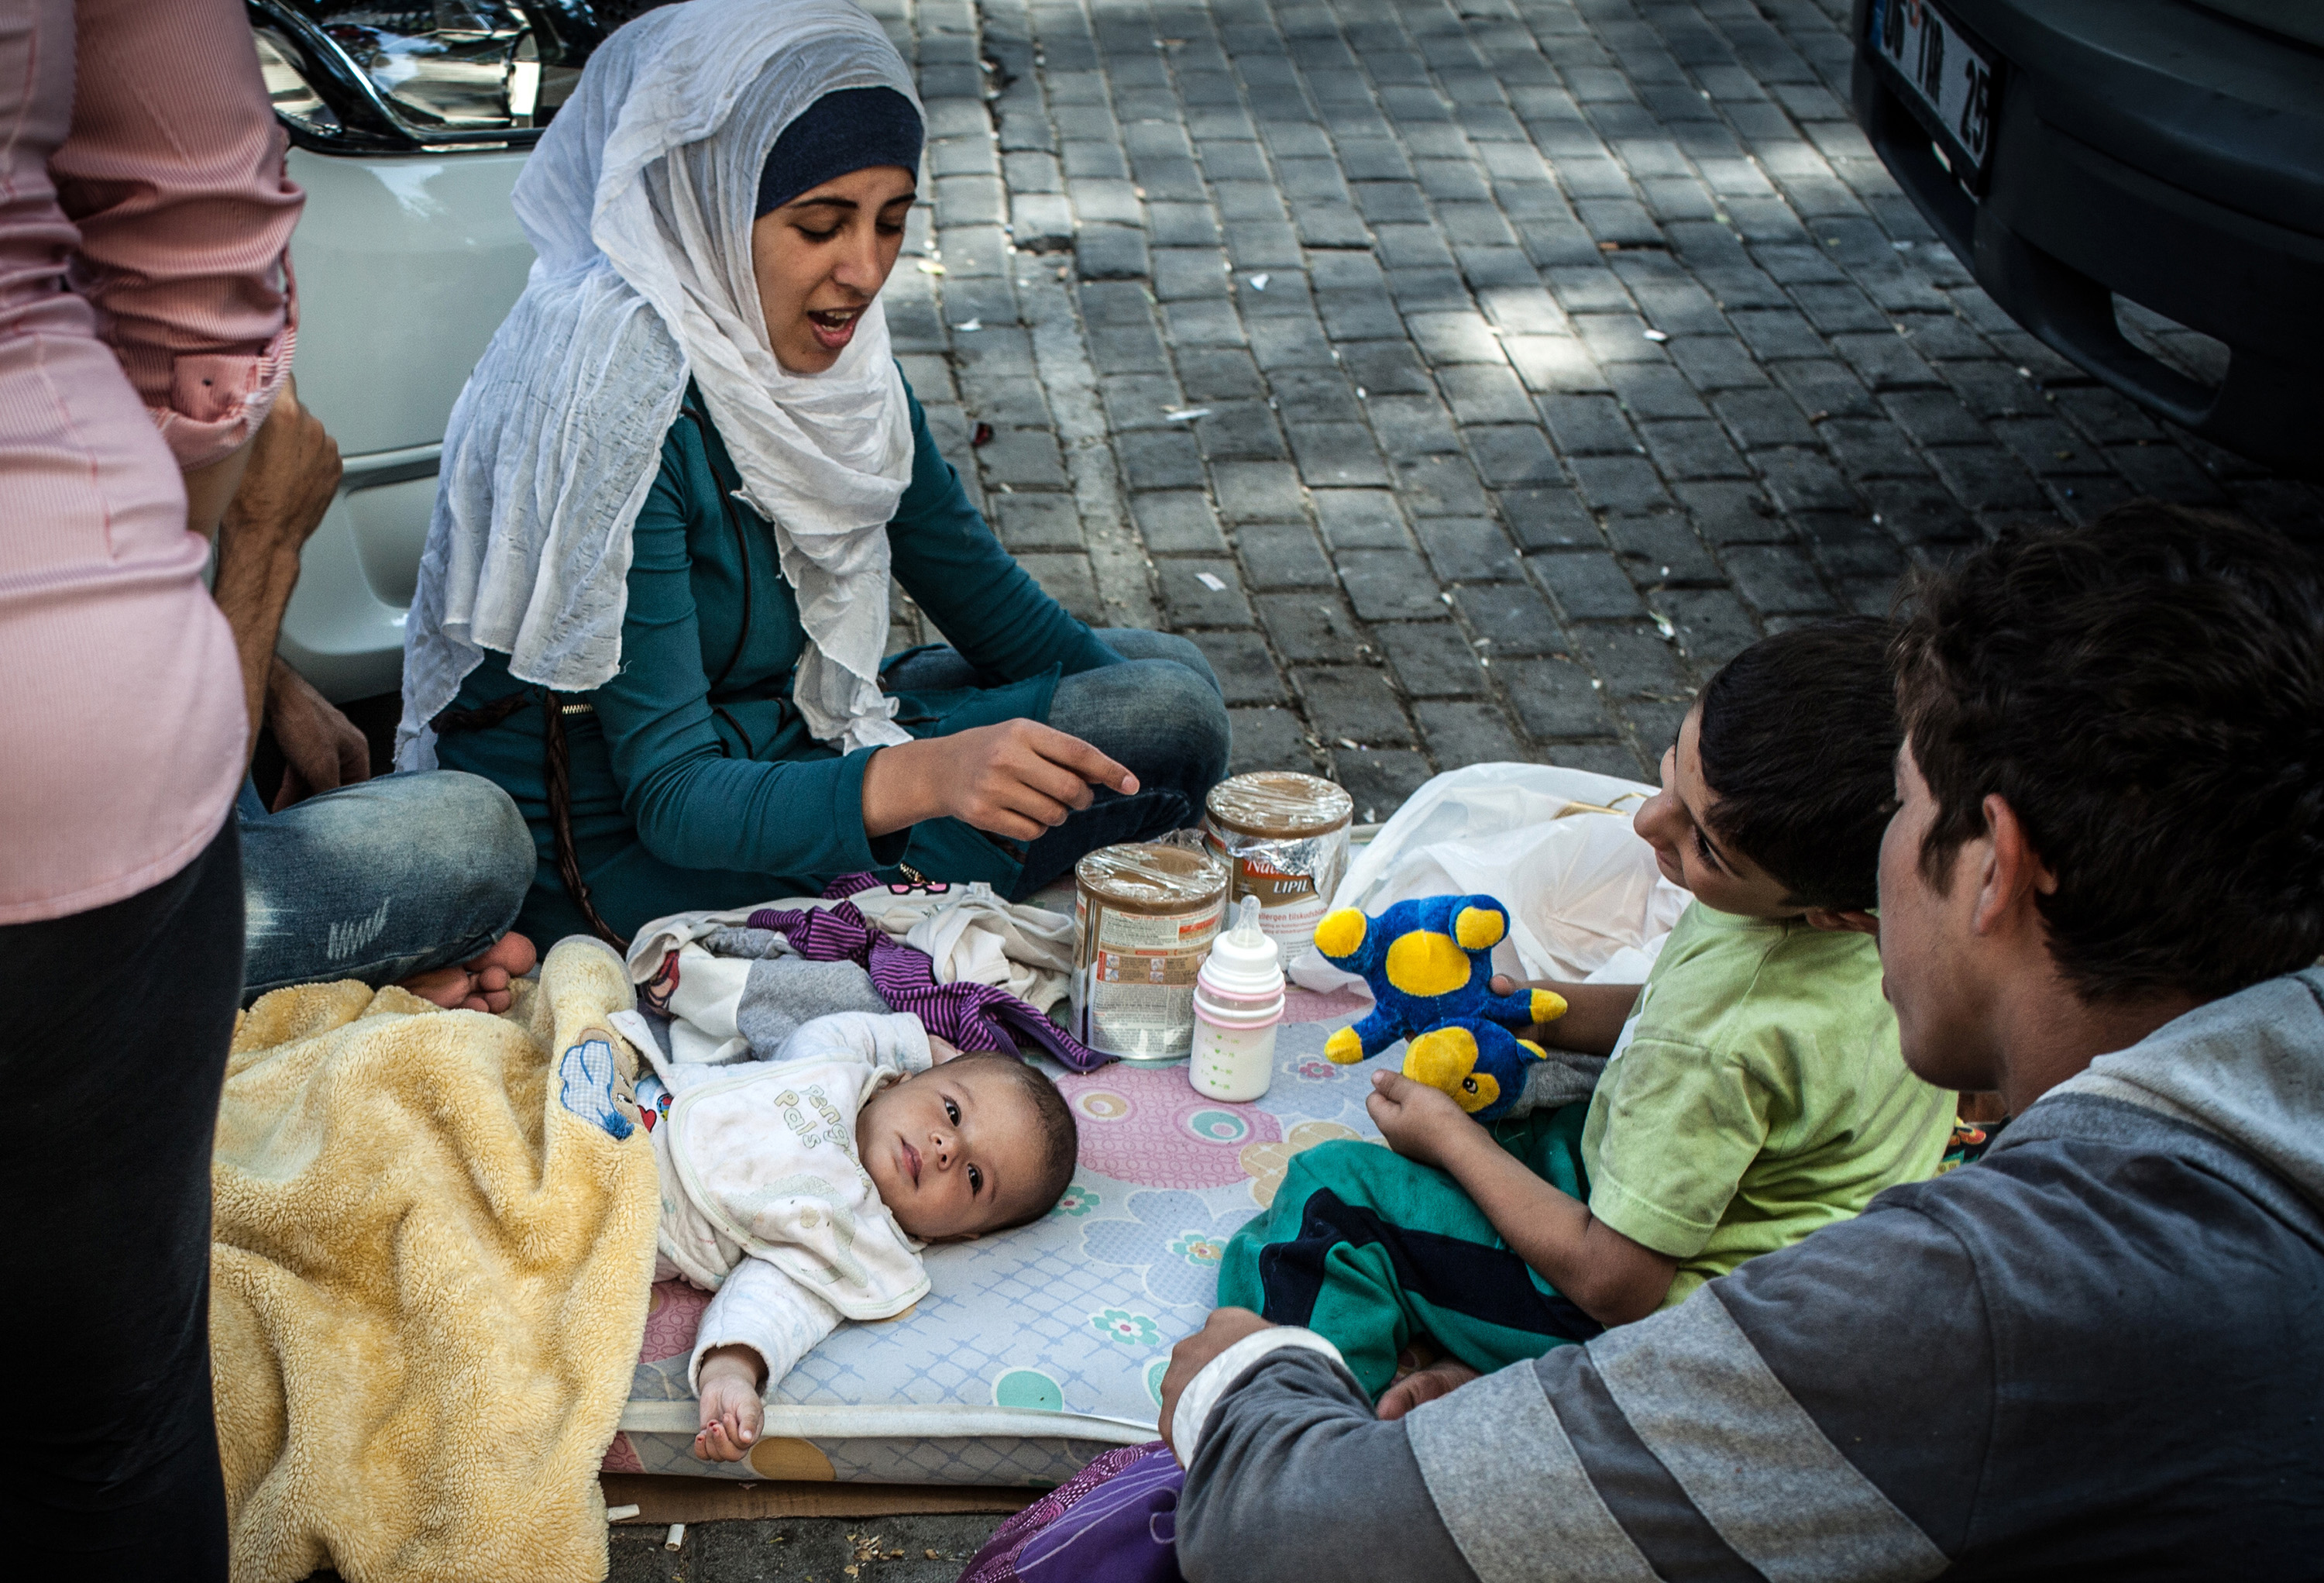 A Syrian family stays on the street where they have been sleeping in Izmir, Turkey, while they attempt to reach Greece by boat on Sept. 3, 2015. (Alice Martins/McClatchy DC/TNS)